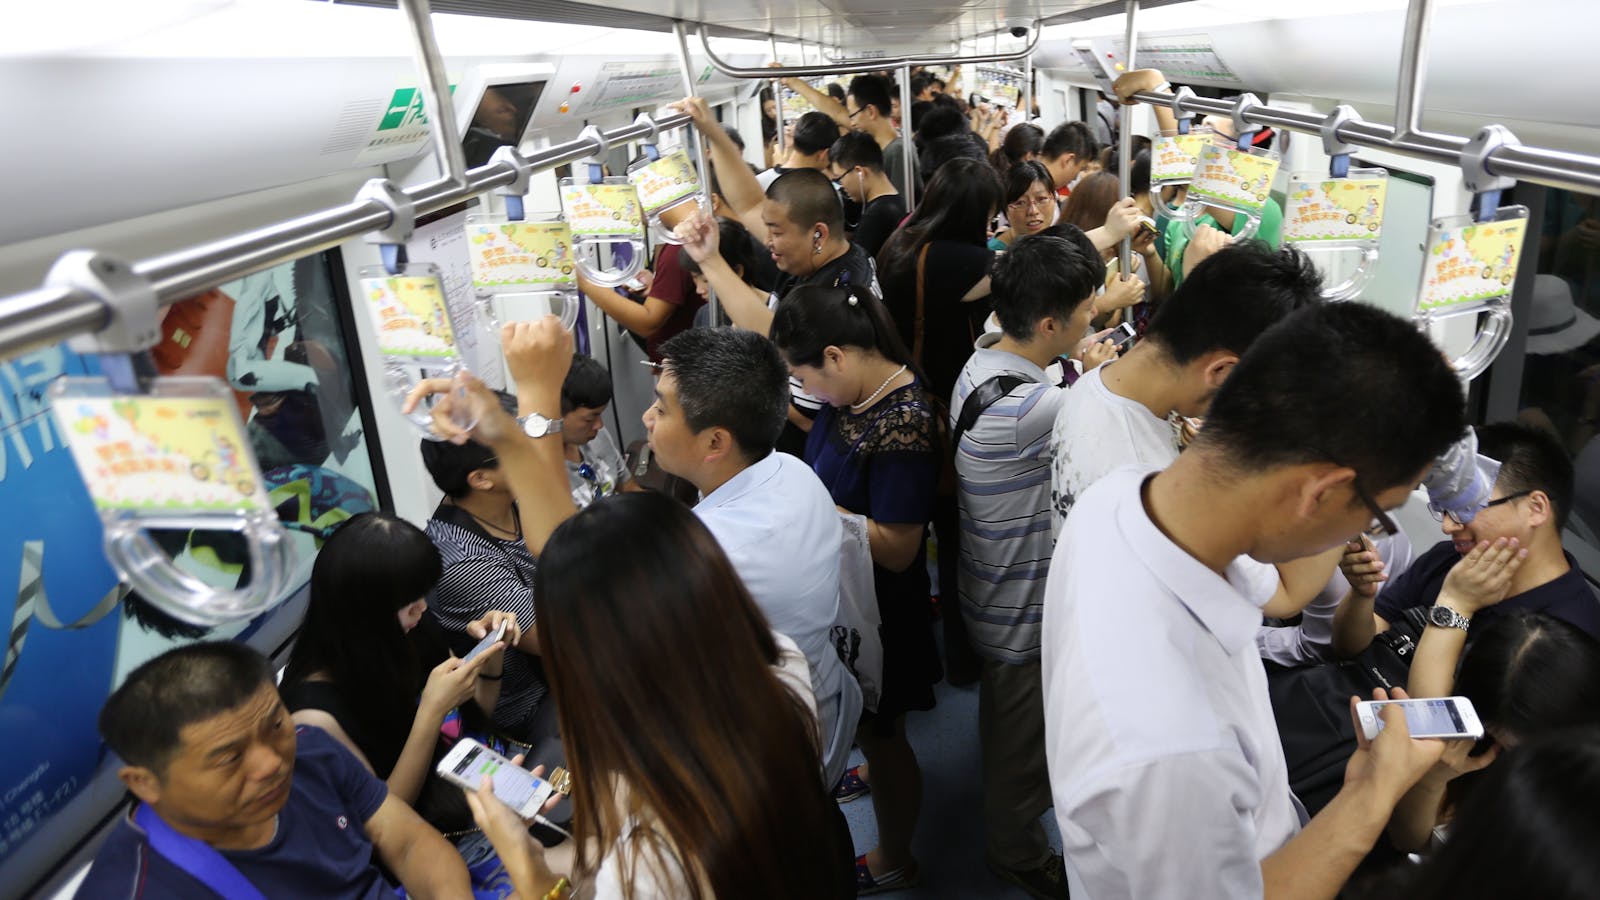 Chinese commuters using WeChat on the Beijing subway. Photo by Hao Xia.